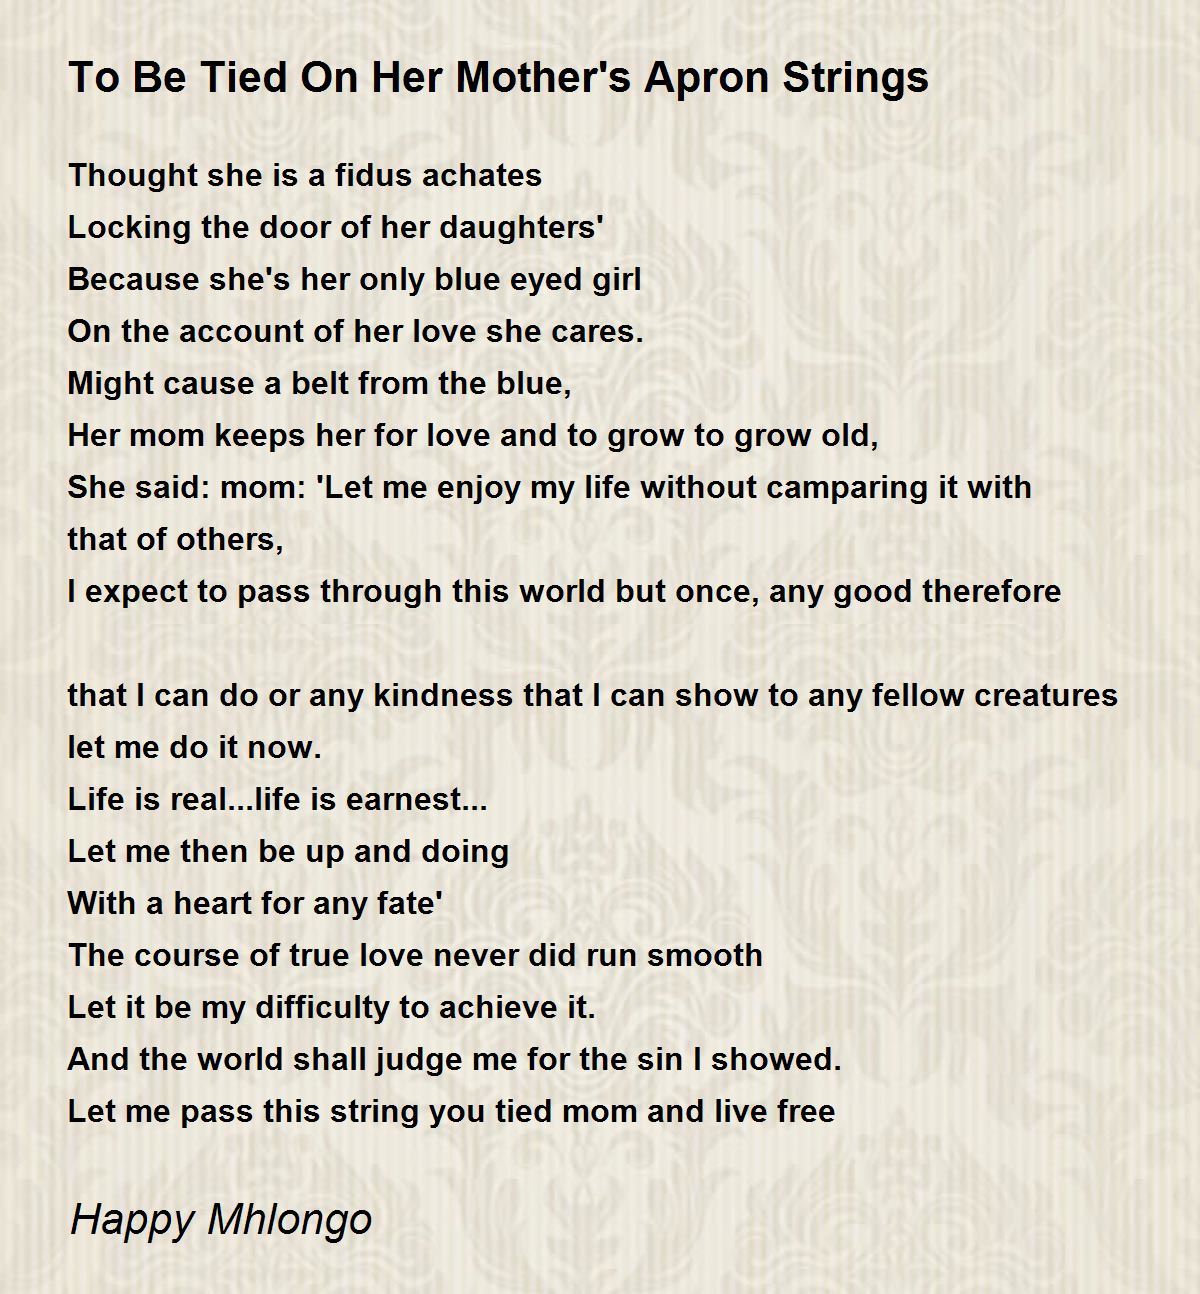 To Be Tied On Her Mother's Apron Strings - To Be Tied On Her Mother's Apron  Strings Poem by Happy Mhlongo